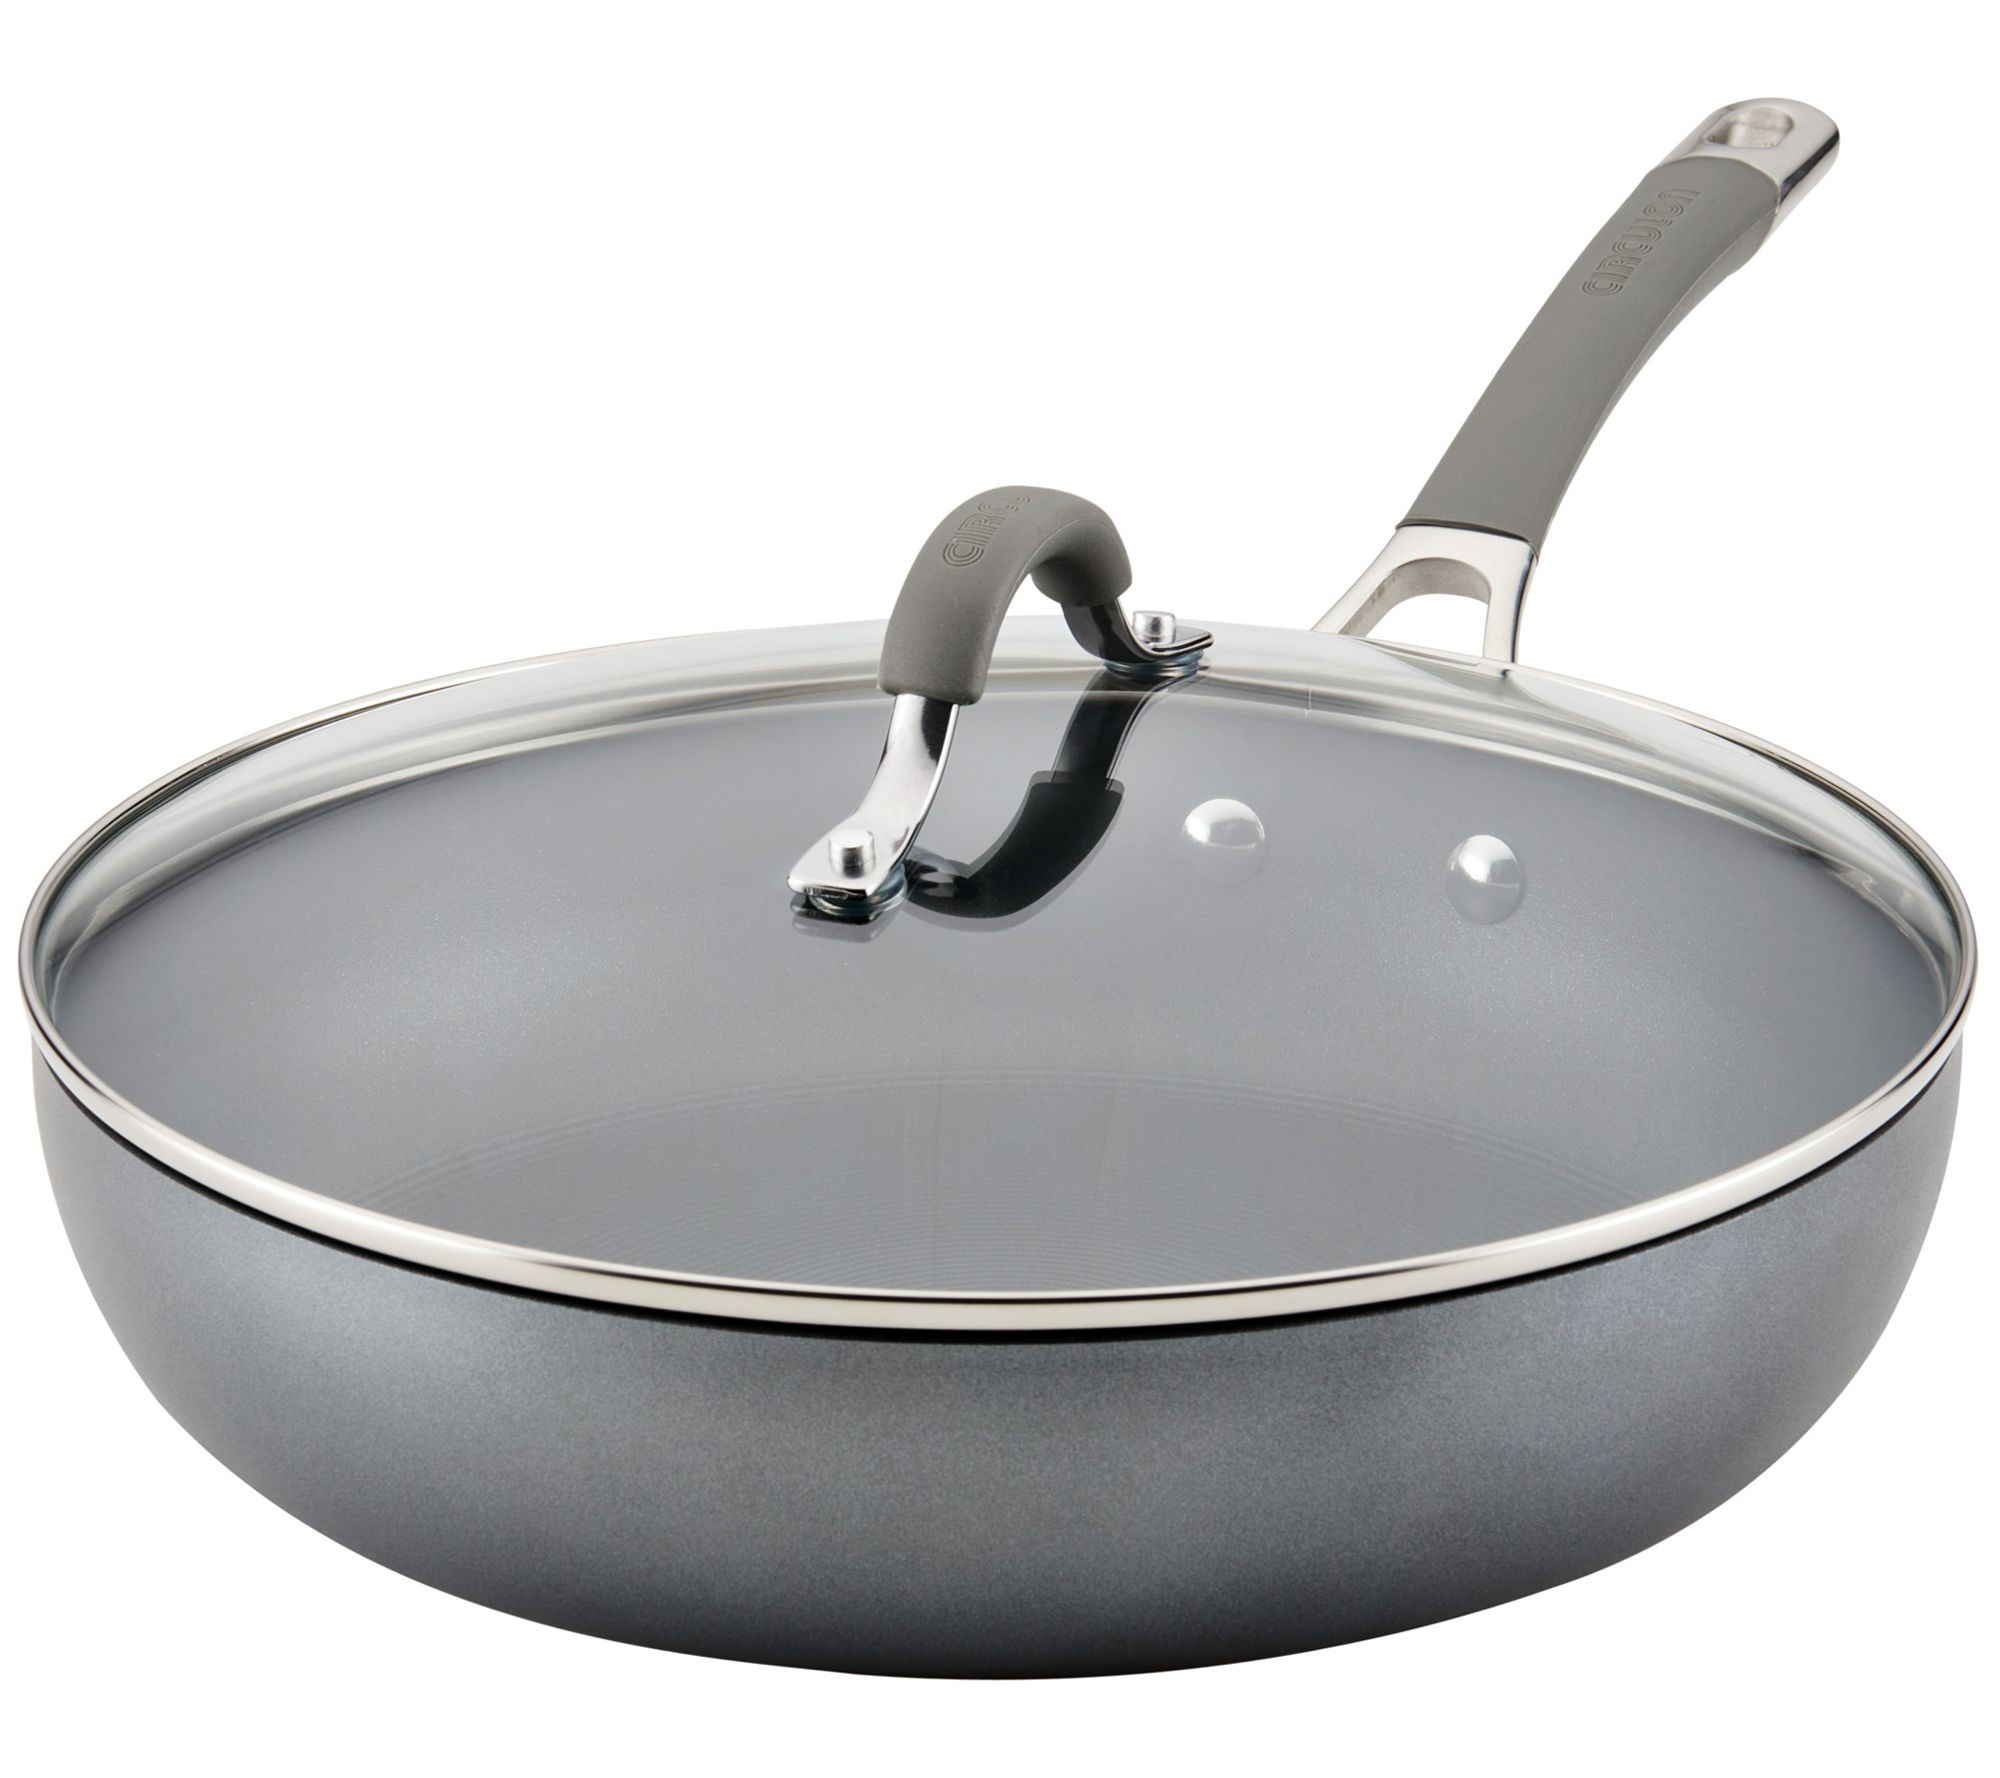 Tri-ply Stainless Steel Diamond Nonstick Frying Pan, 12 inch, 12 INCH -  Fry's Food Stores